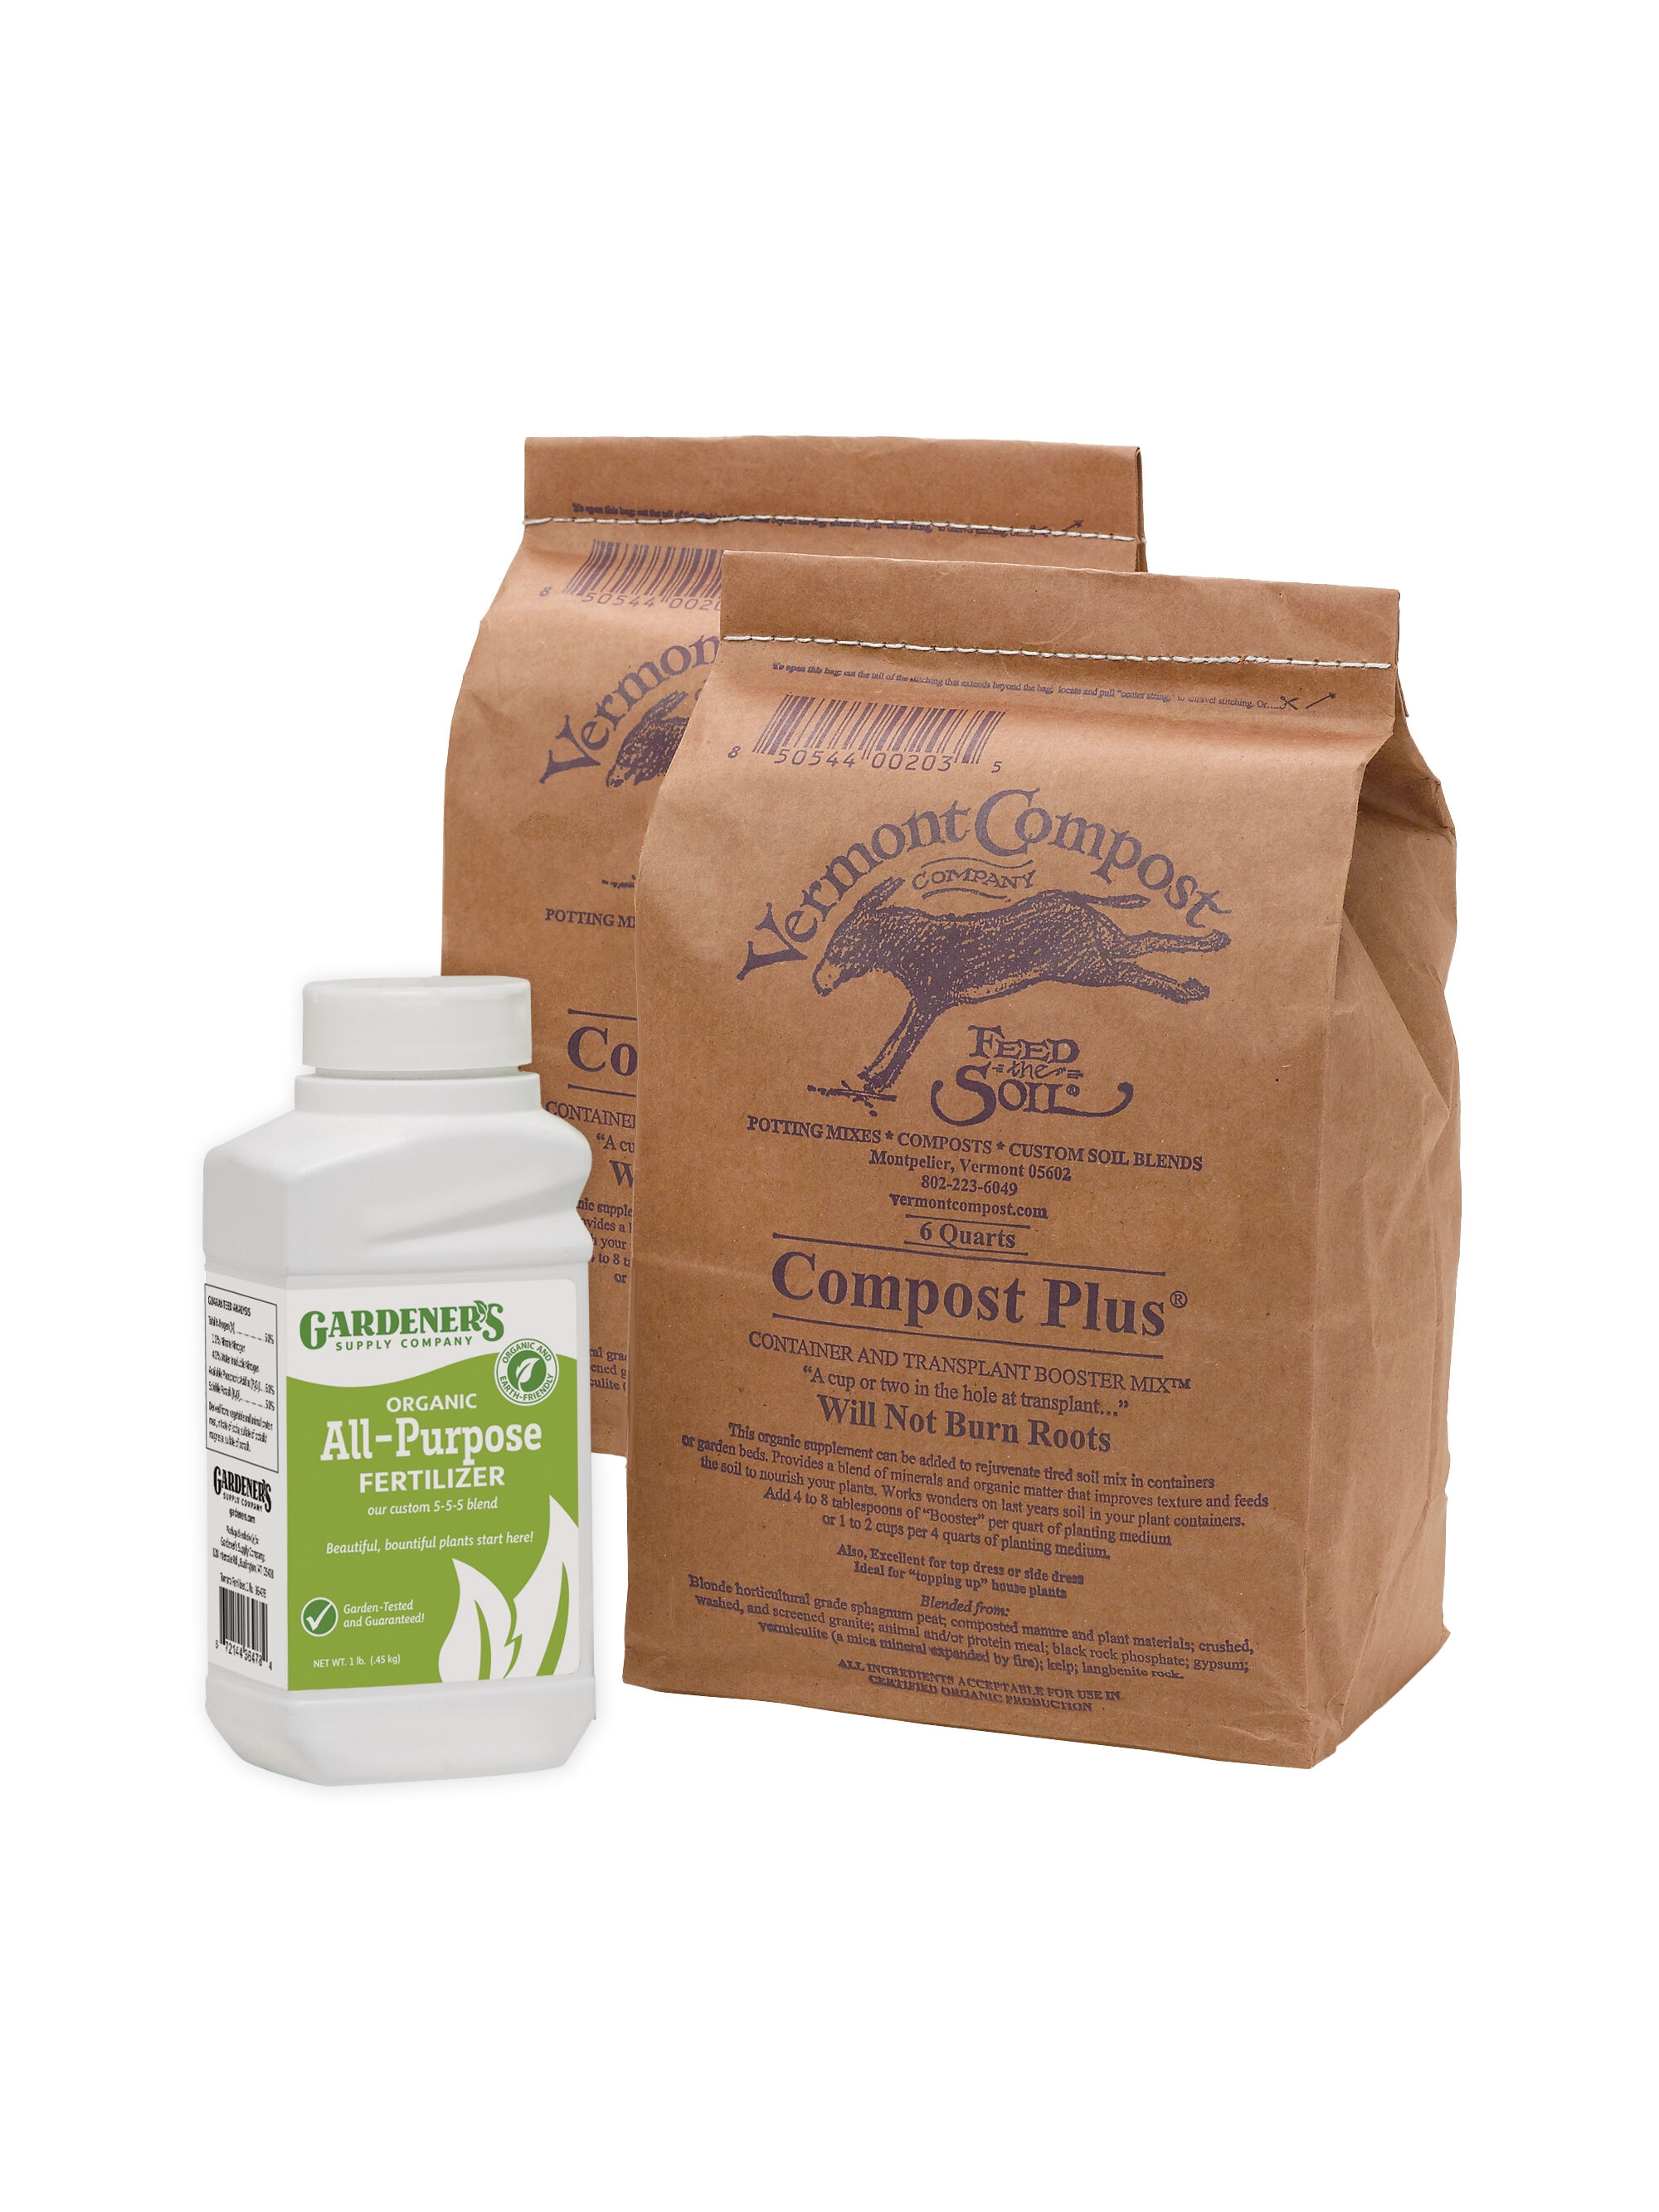 Elevated Garden Booster Compost Mix Kit